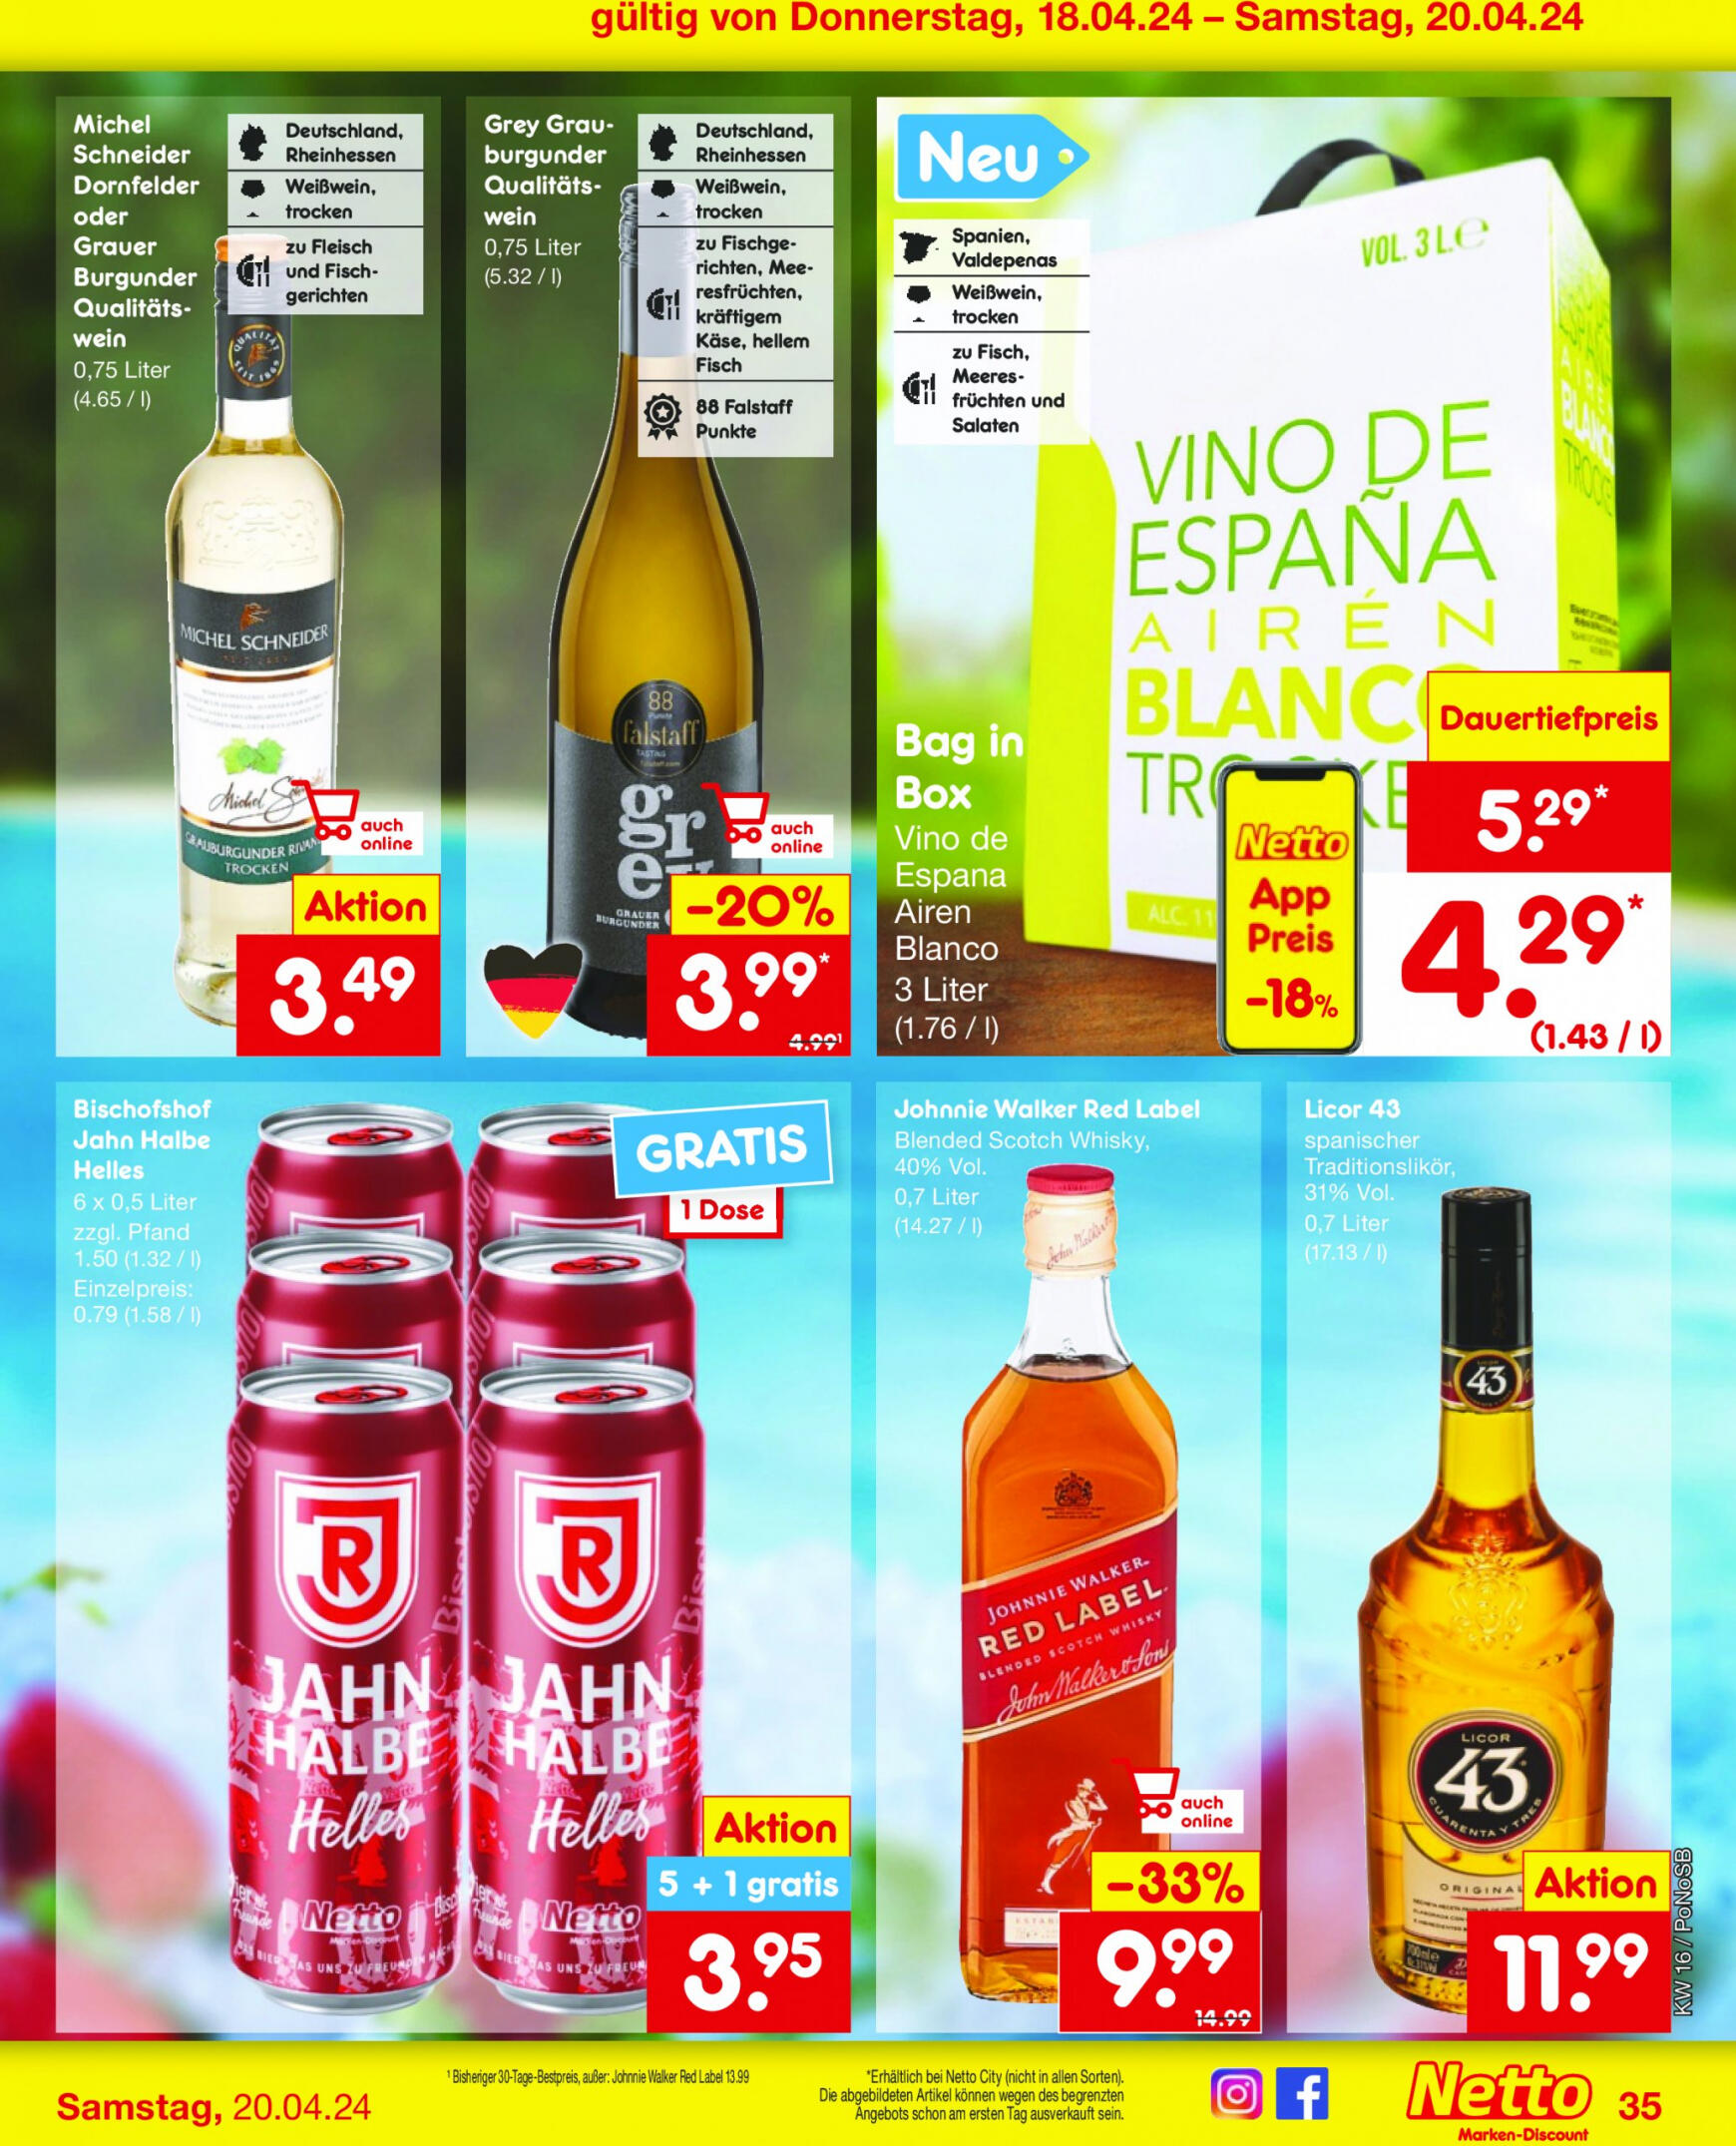 netto - Flyer Netto aktuell 15.04. - 20.04. - page: 41